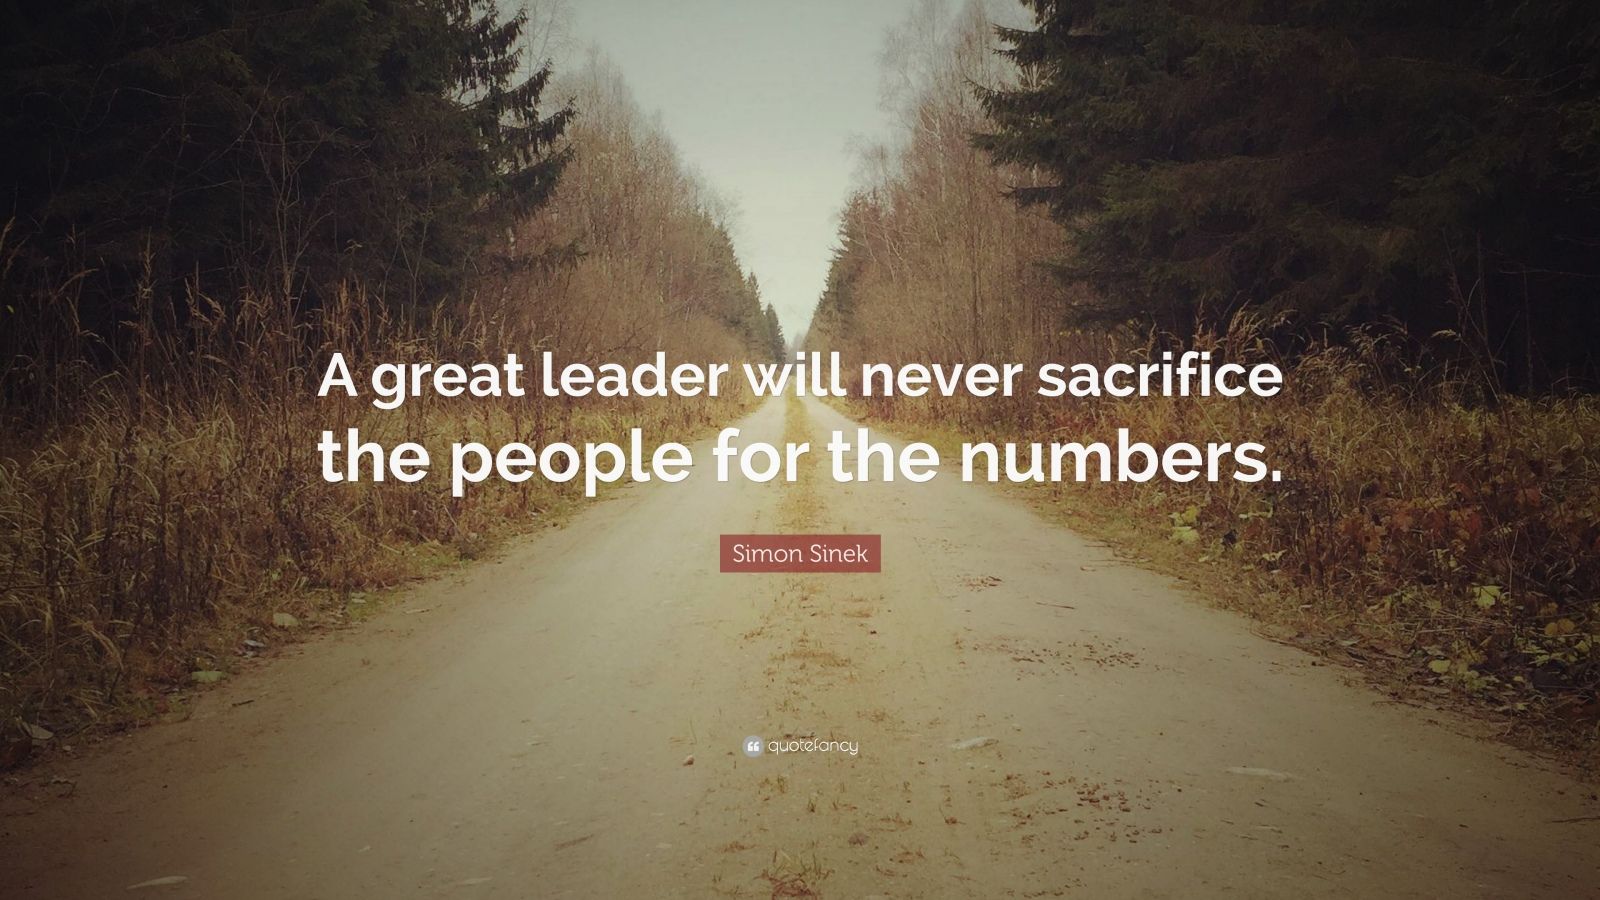 Simon Sinek Quote: “A great leader will never sacrifice the people for ...